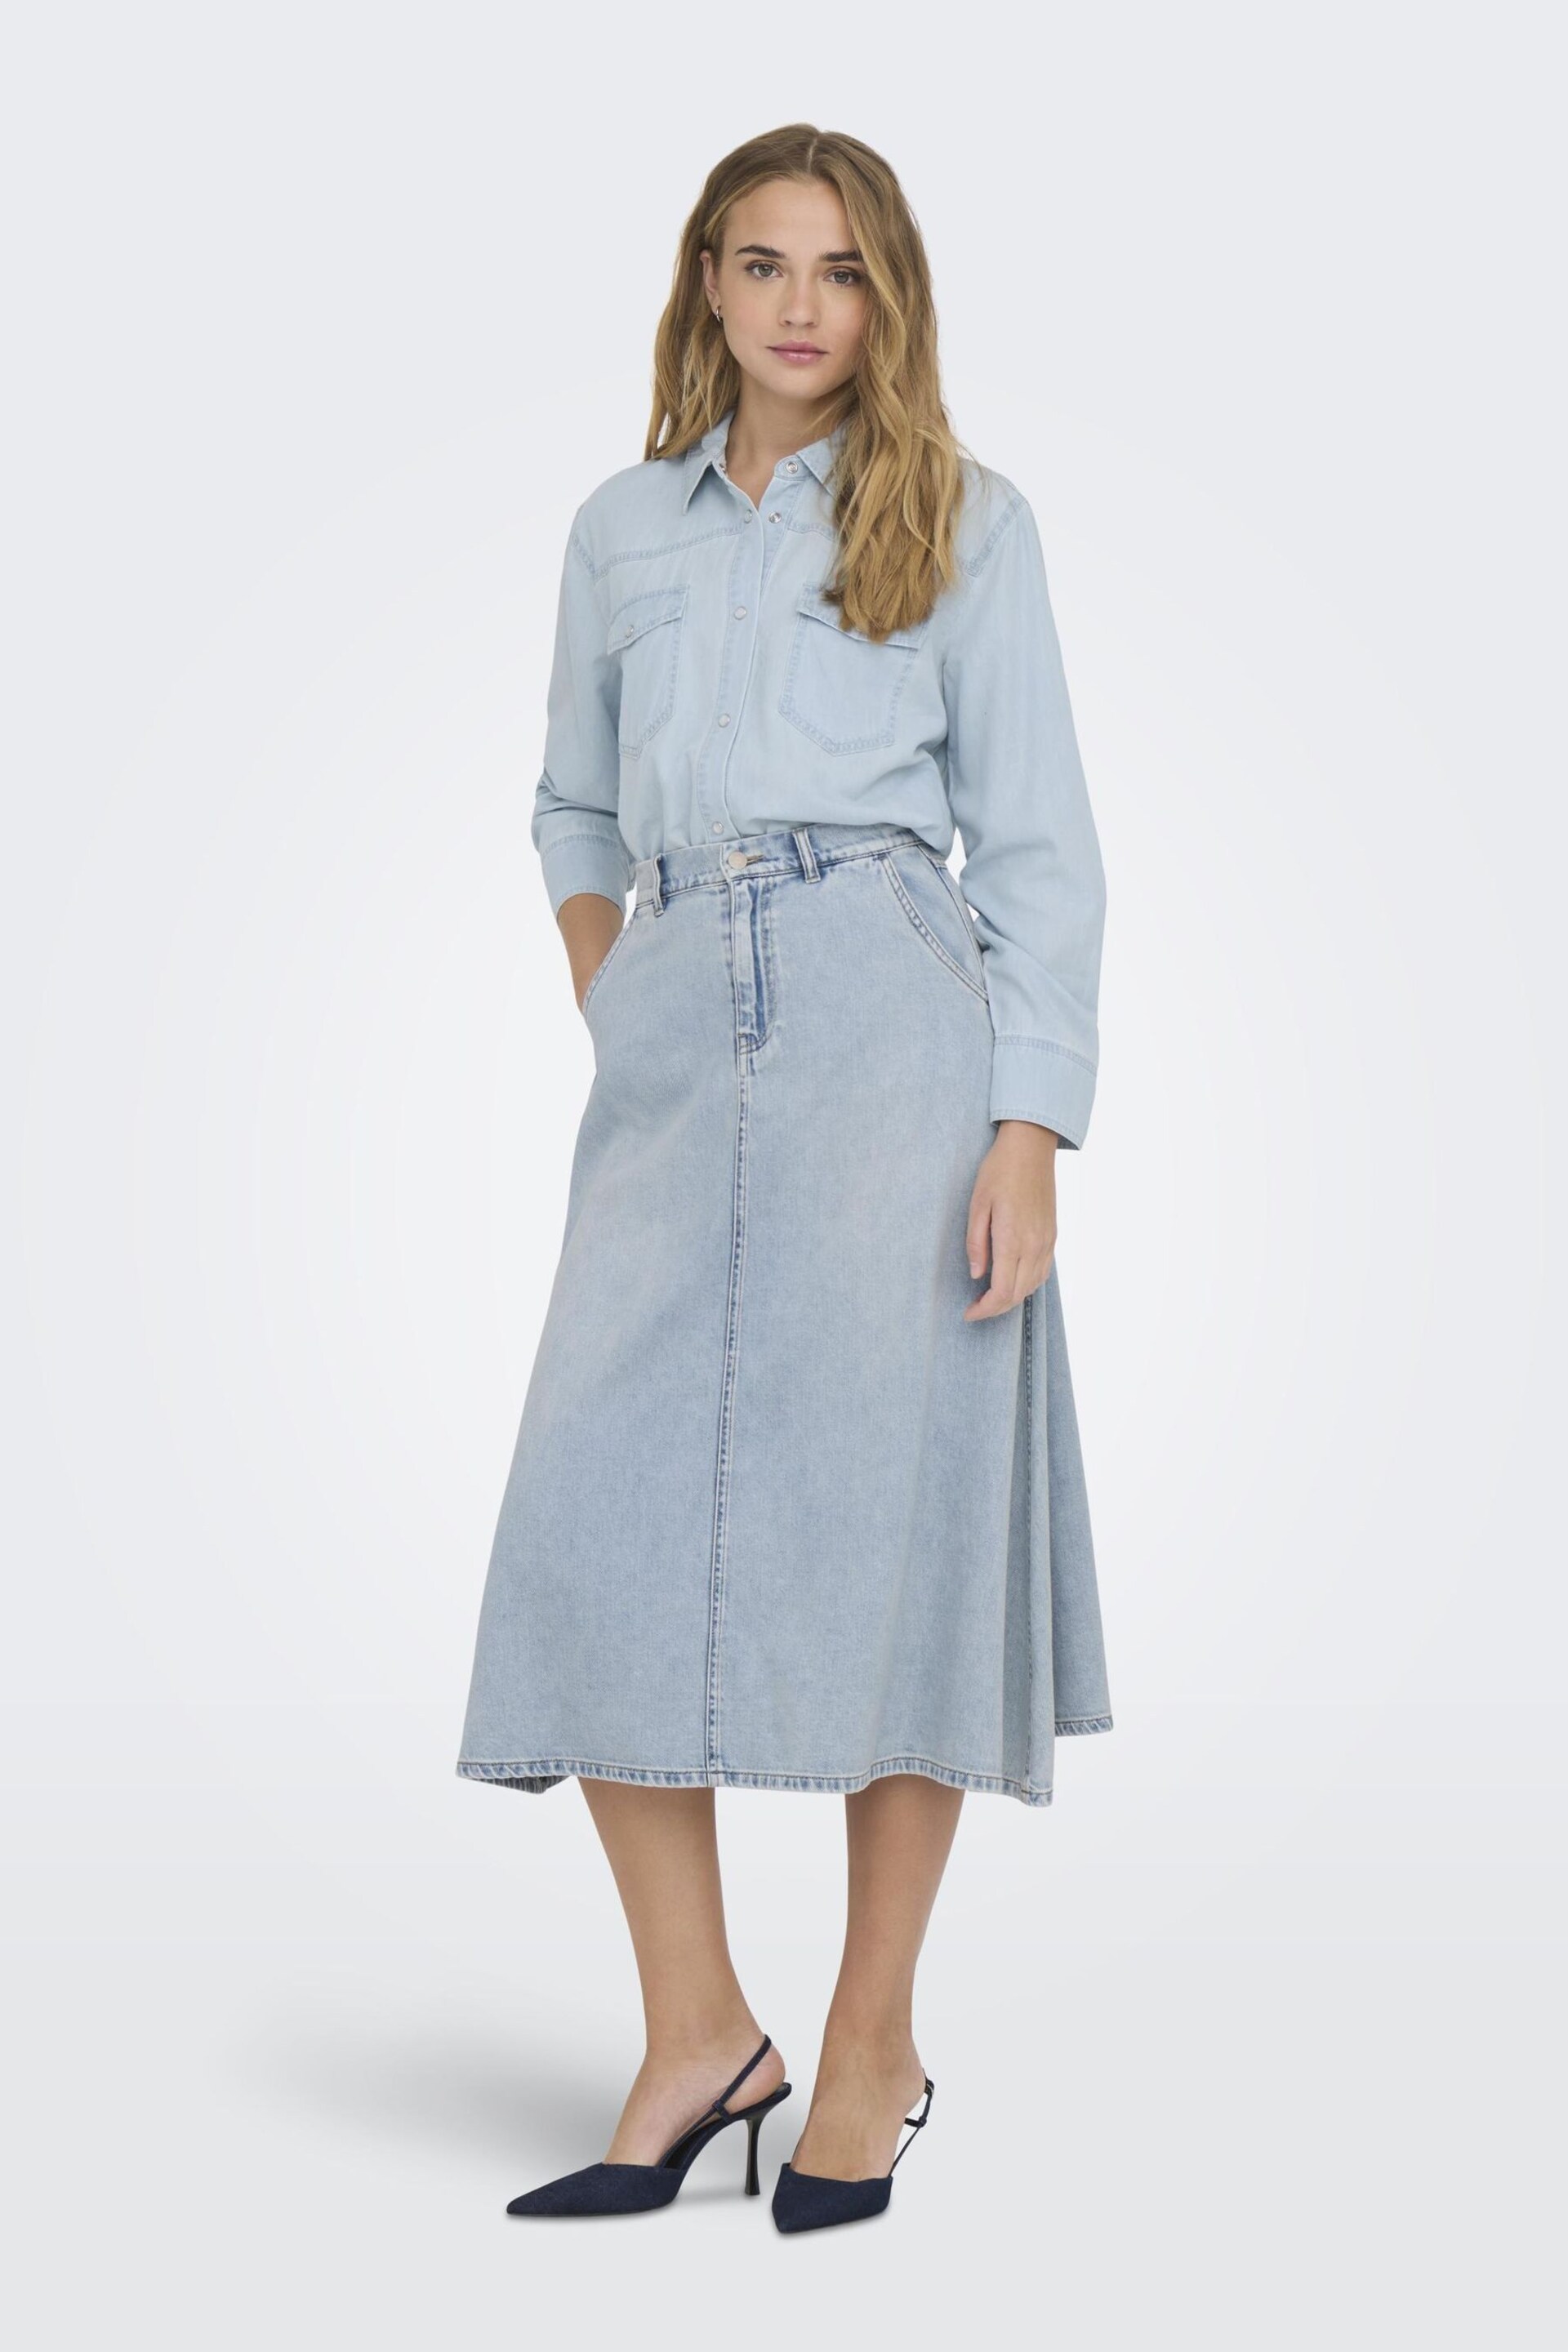 ONLY Blue Relaxed Fit Denim Maxi Skirt - Image 1 of 6